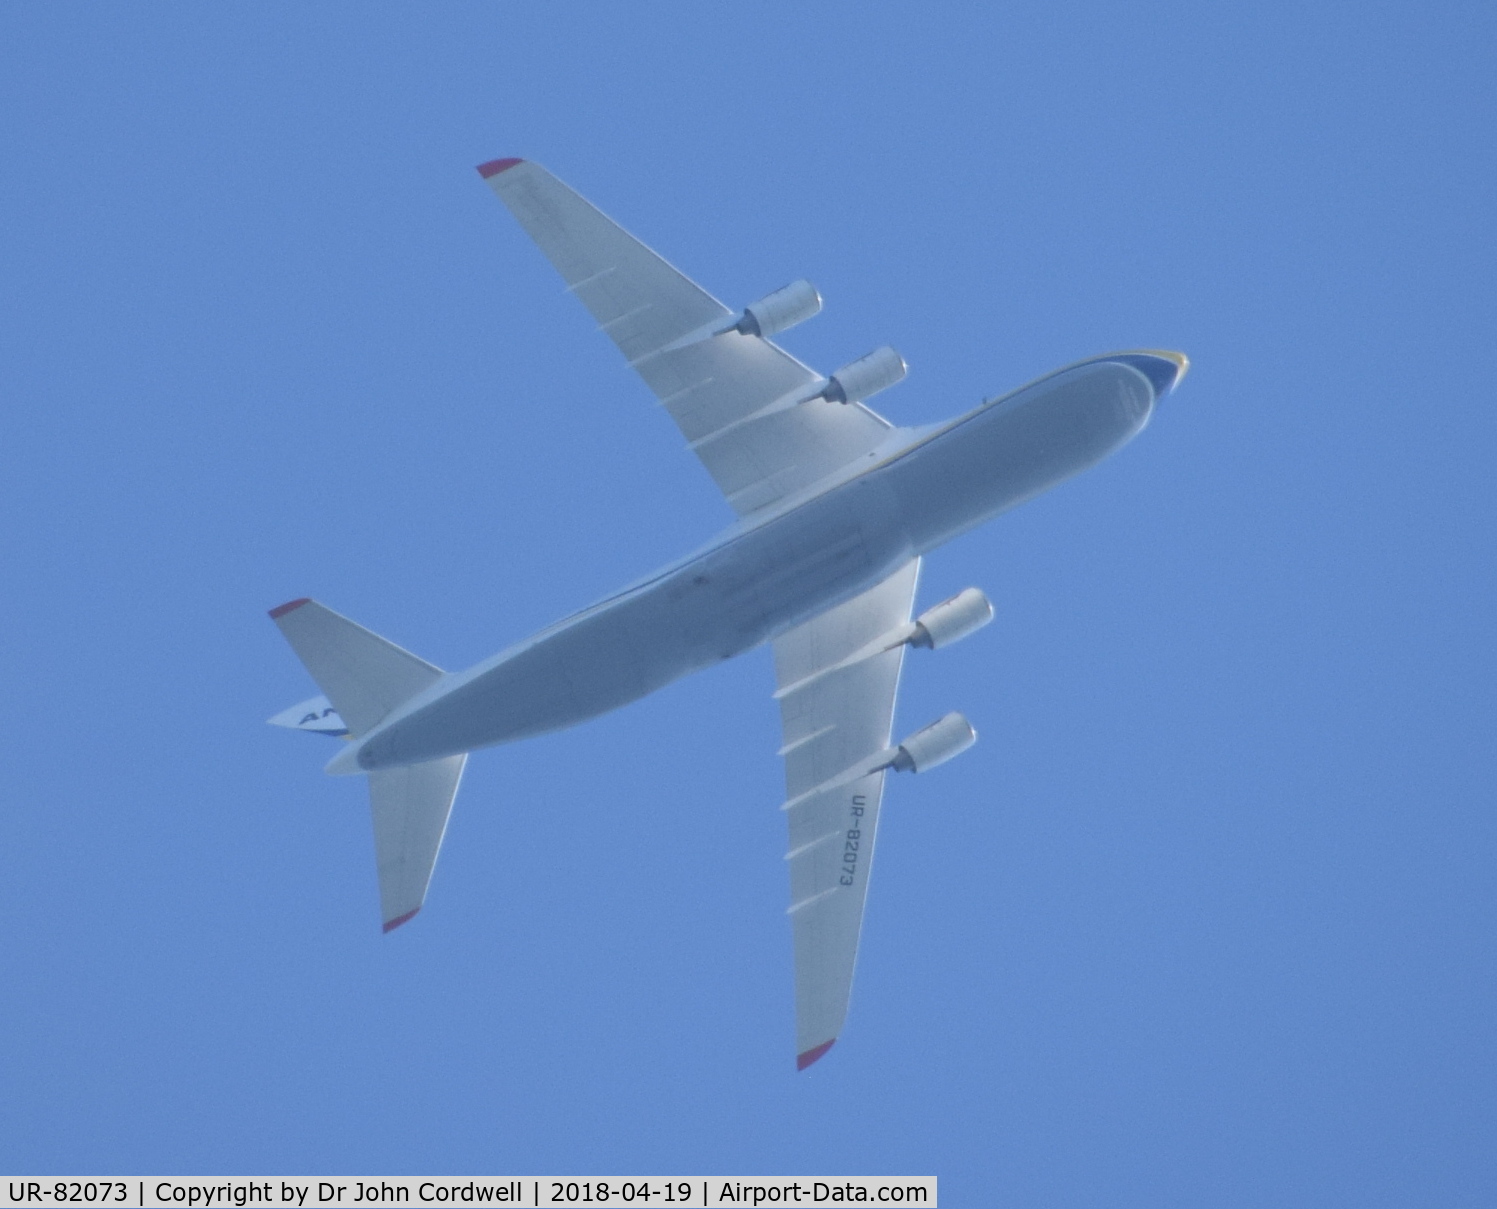 UR-82073, 1994 Antonov An-124-100 Ruslan C/N 9773054359139, Over Wotton-under-Edge, Gloucestershire, 17:02 BST en route from Brize Norton to Goose Bay, Canada.